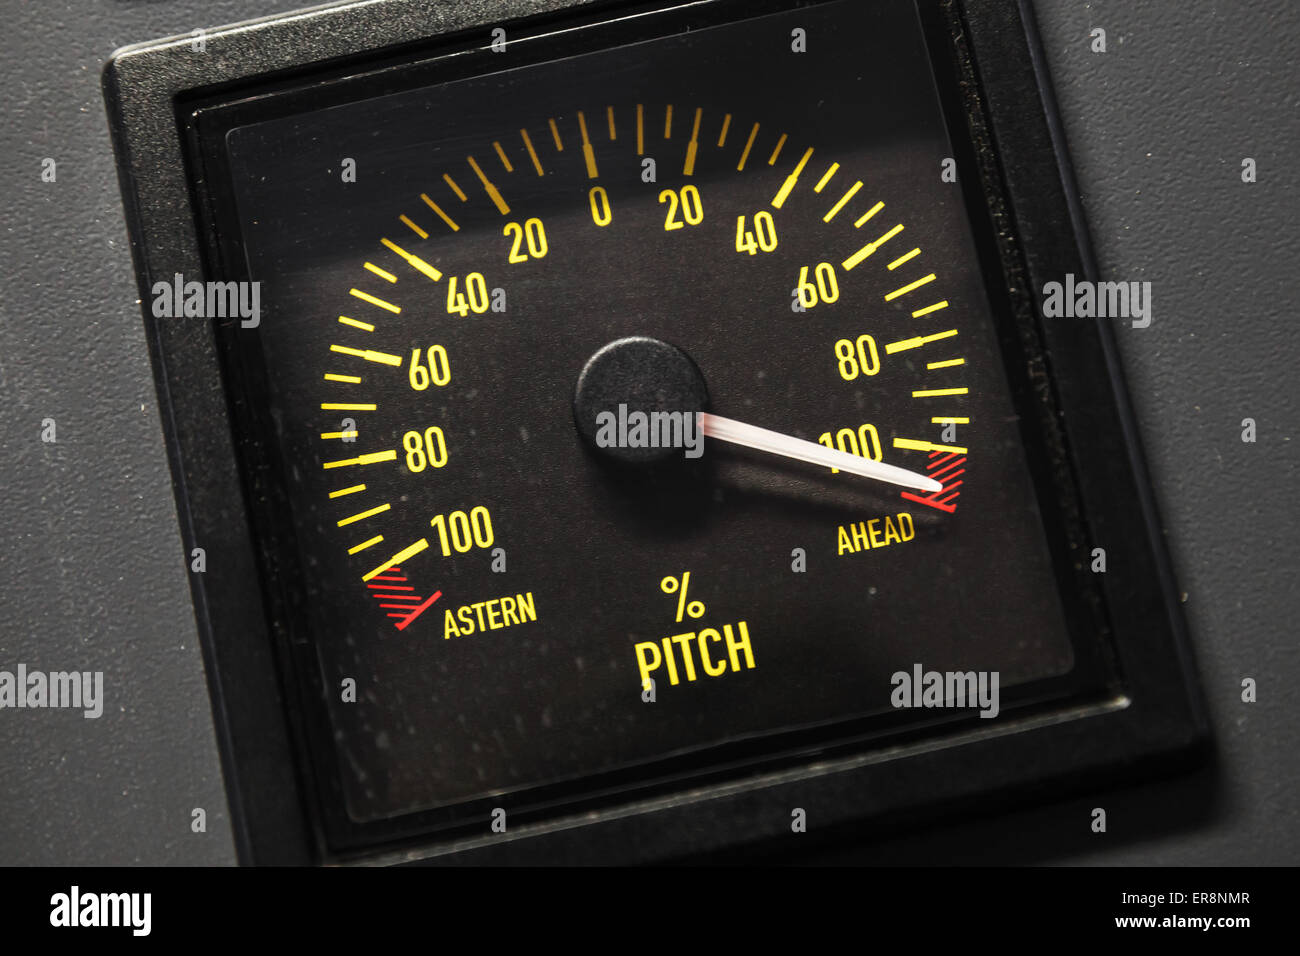 Lighted navigation pitch indicator scale, selective focus Stock Photo